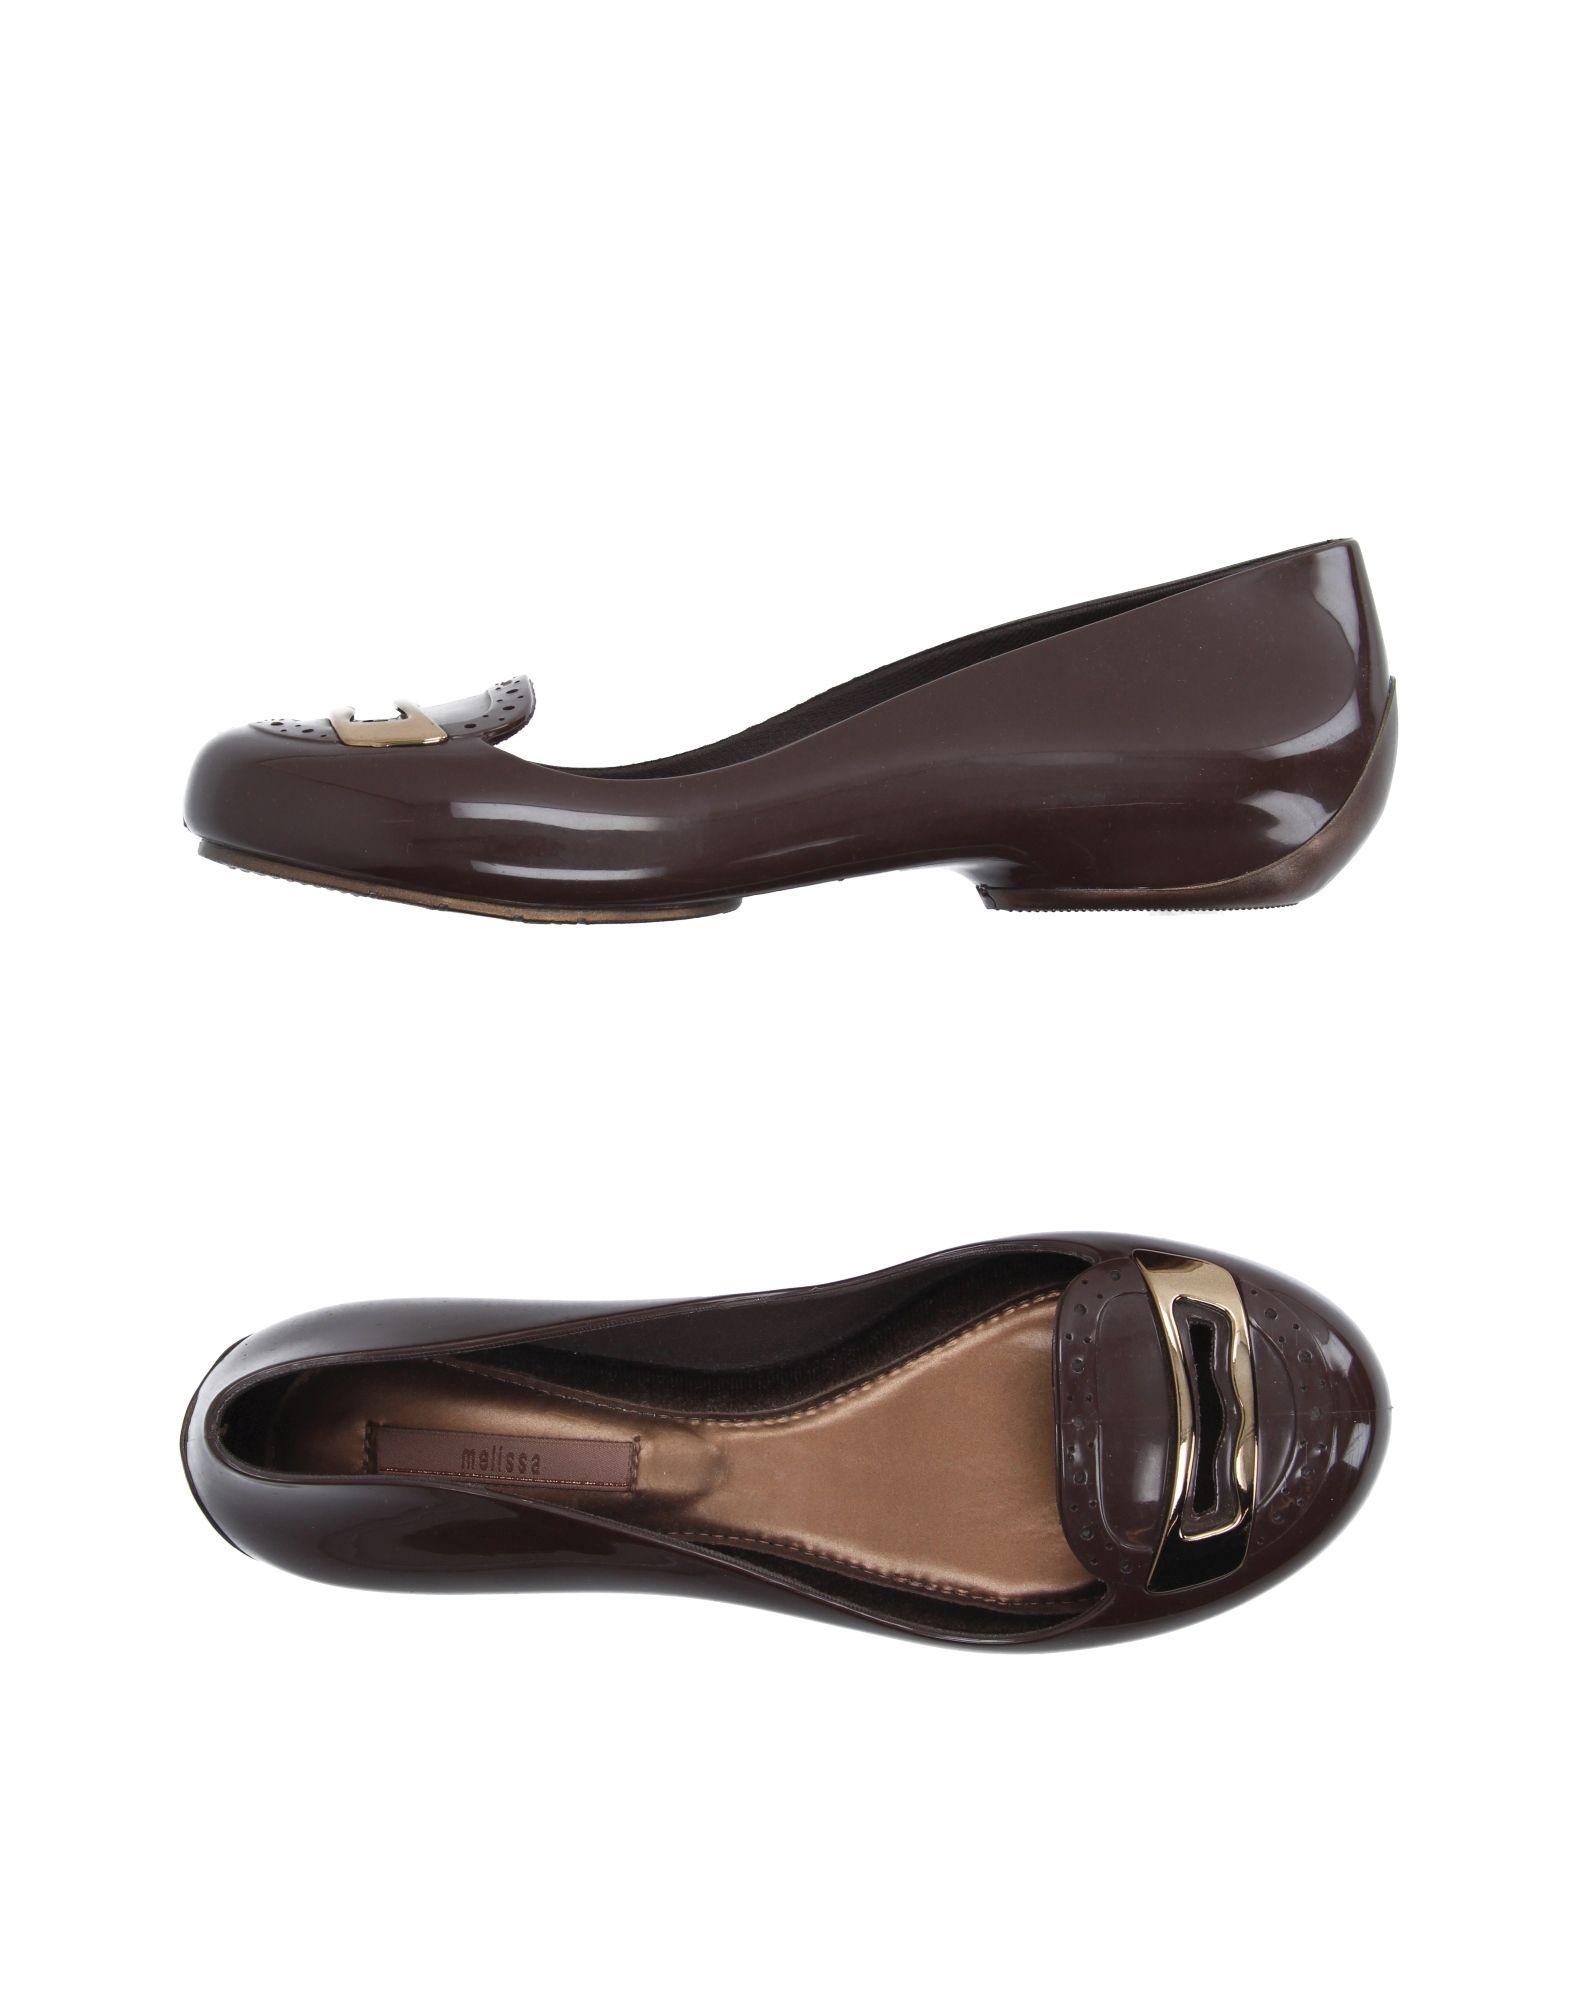 Melissa Loafer in Cocoa (Brown) - Lyst